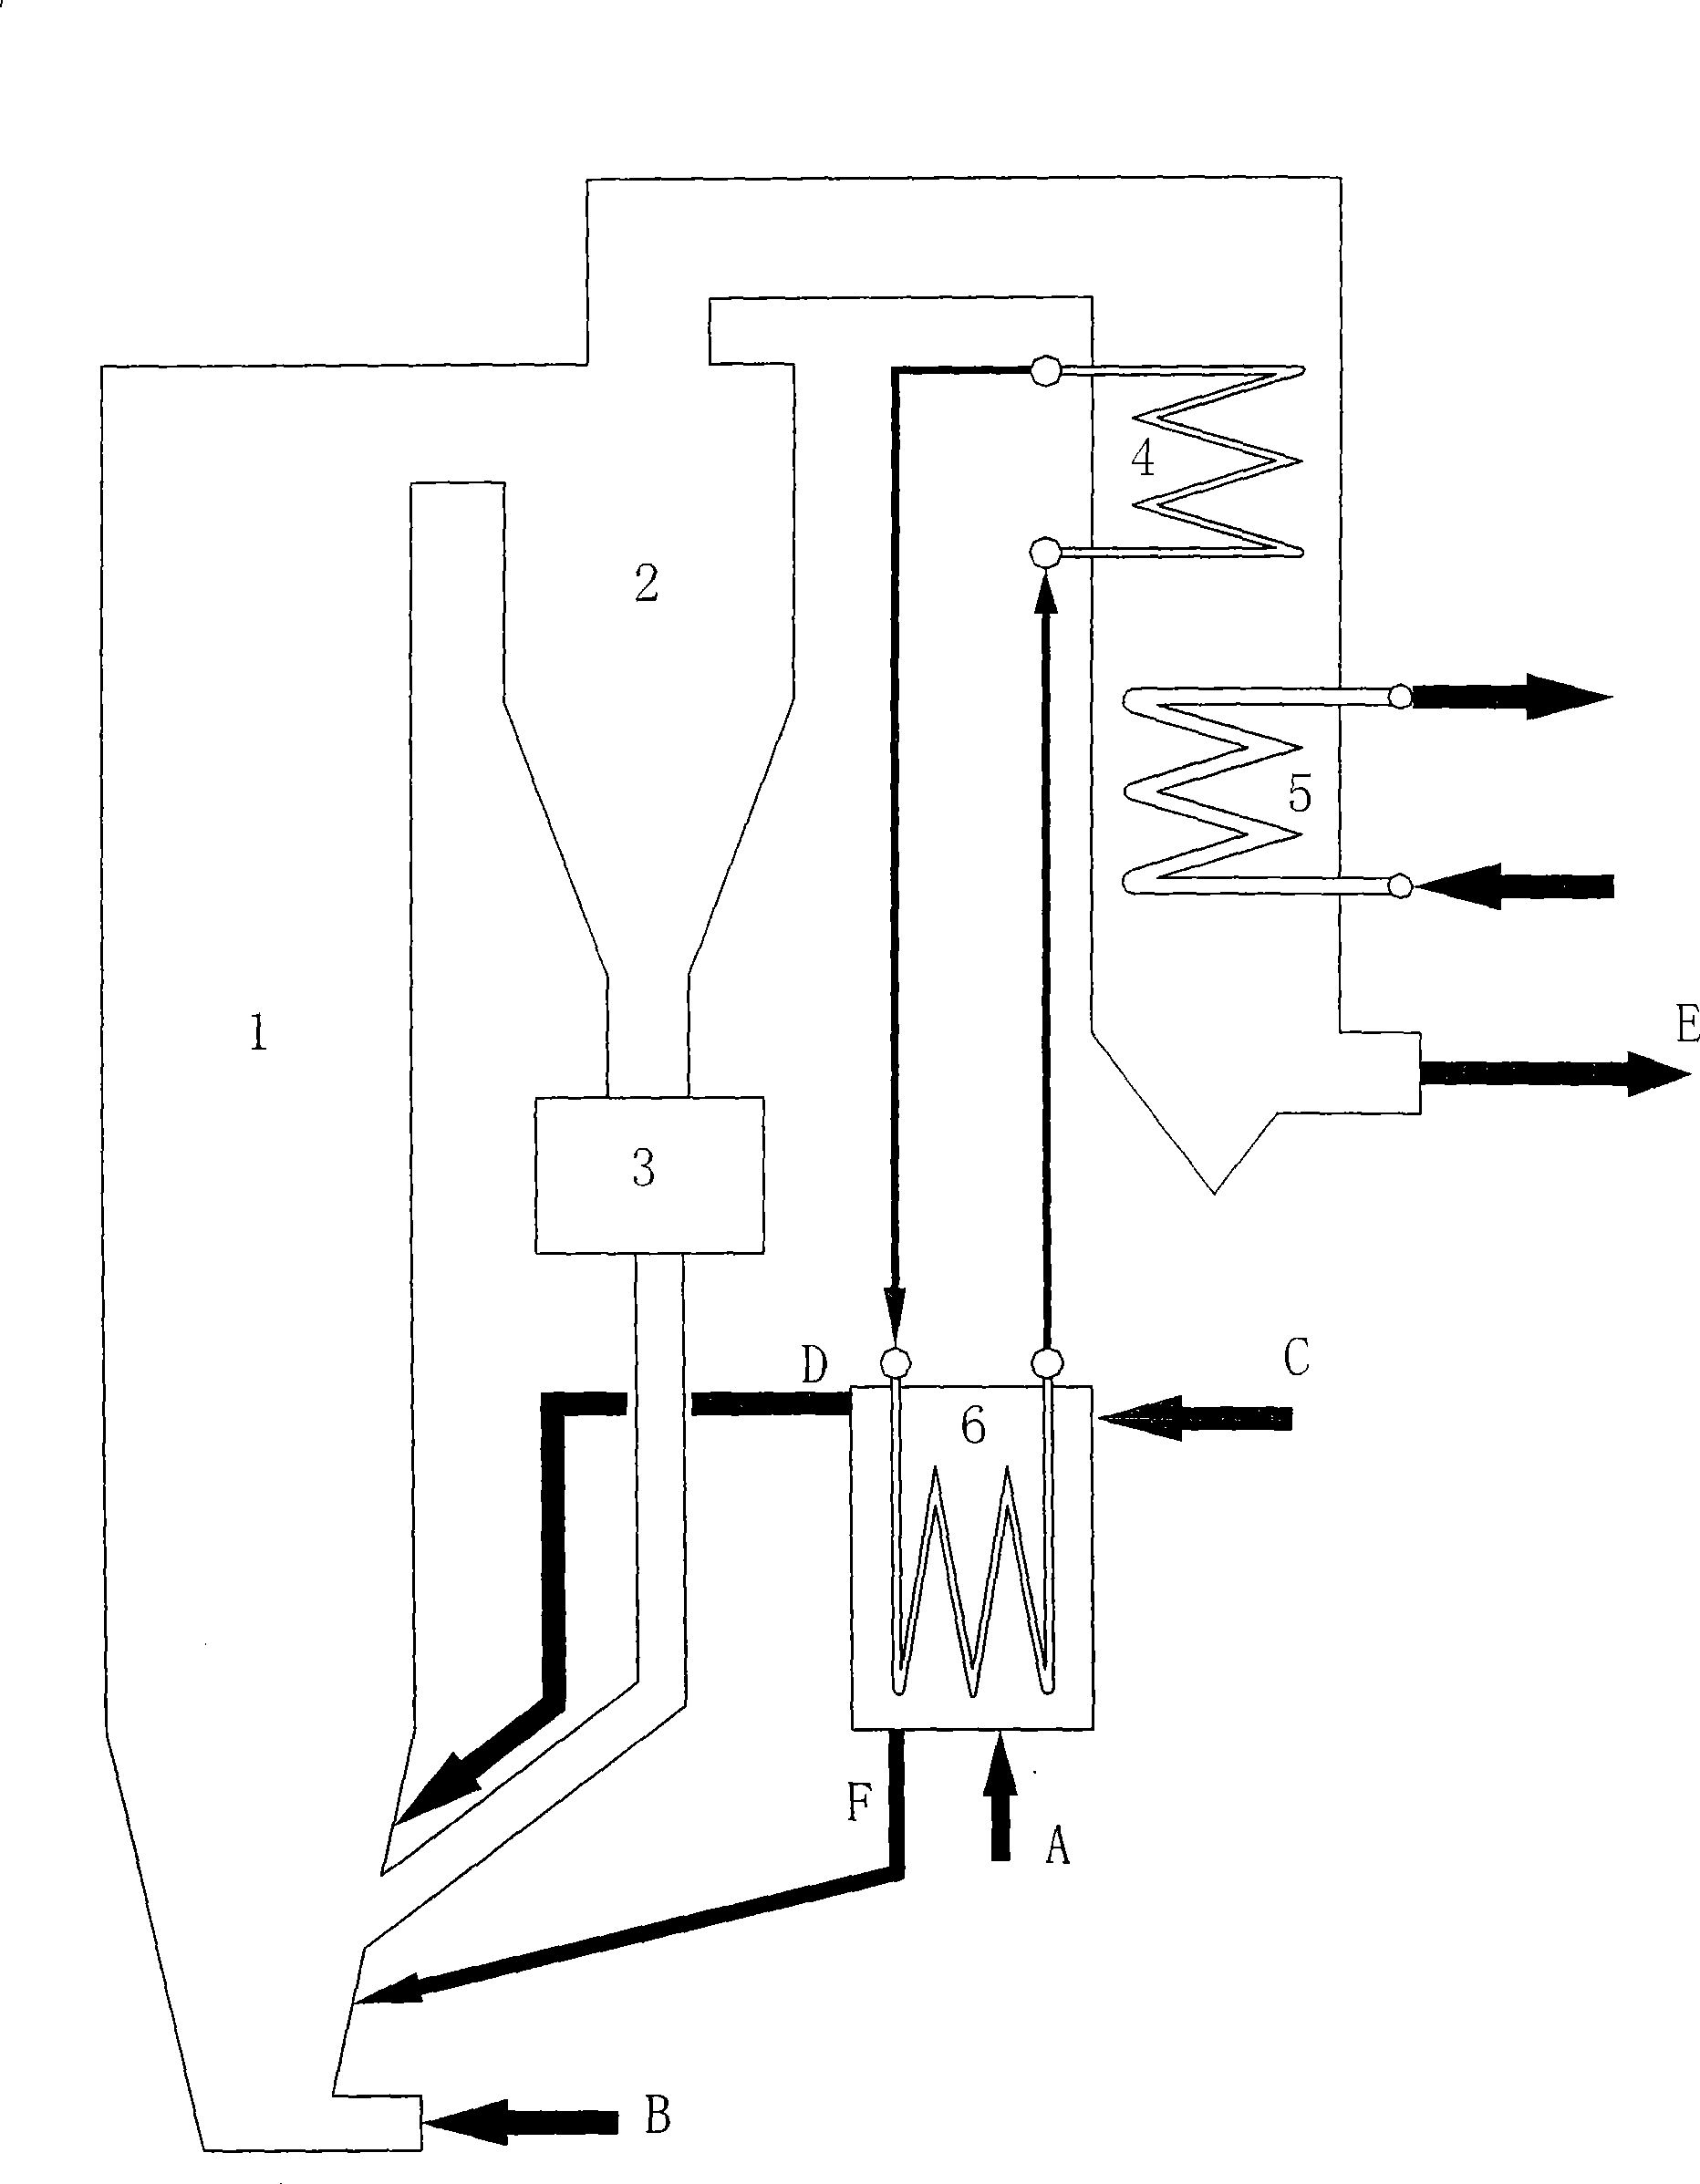 Anhydration and incineration processing method for wet sludge